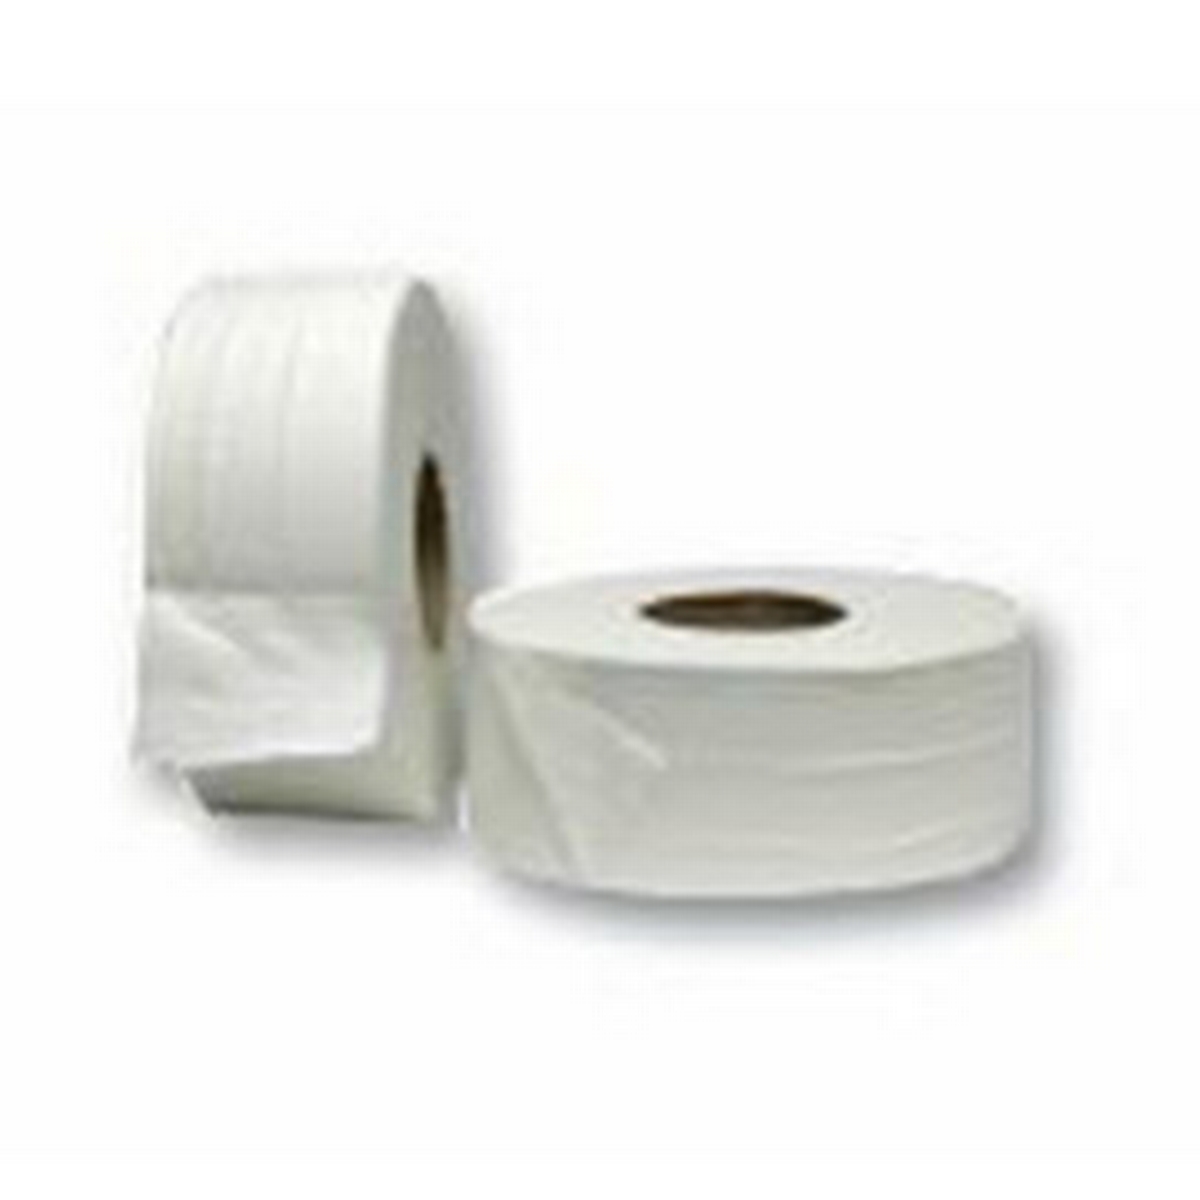 Have you ever compared toilet paper rolls?